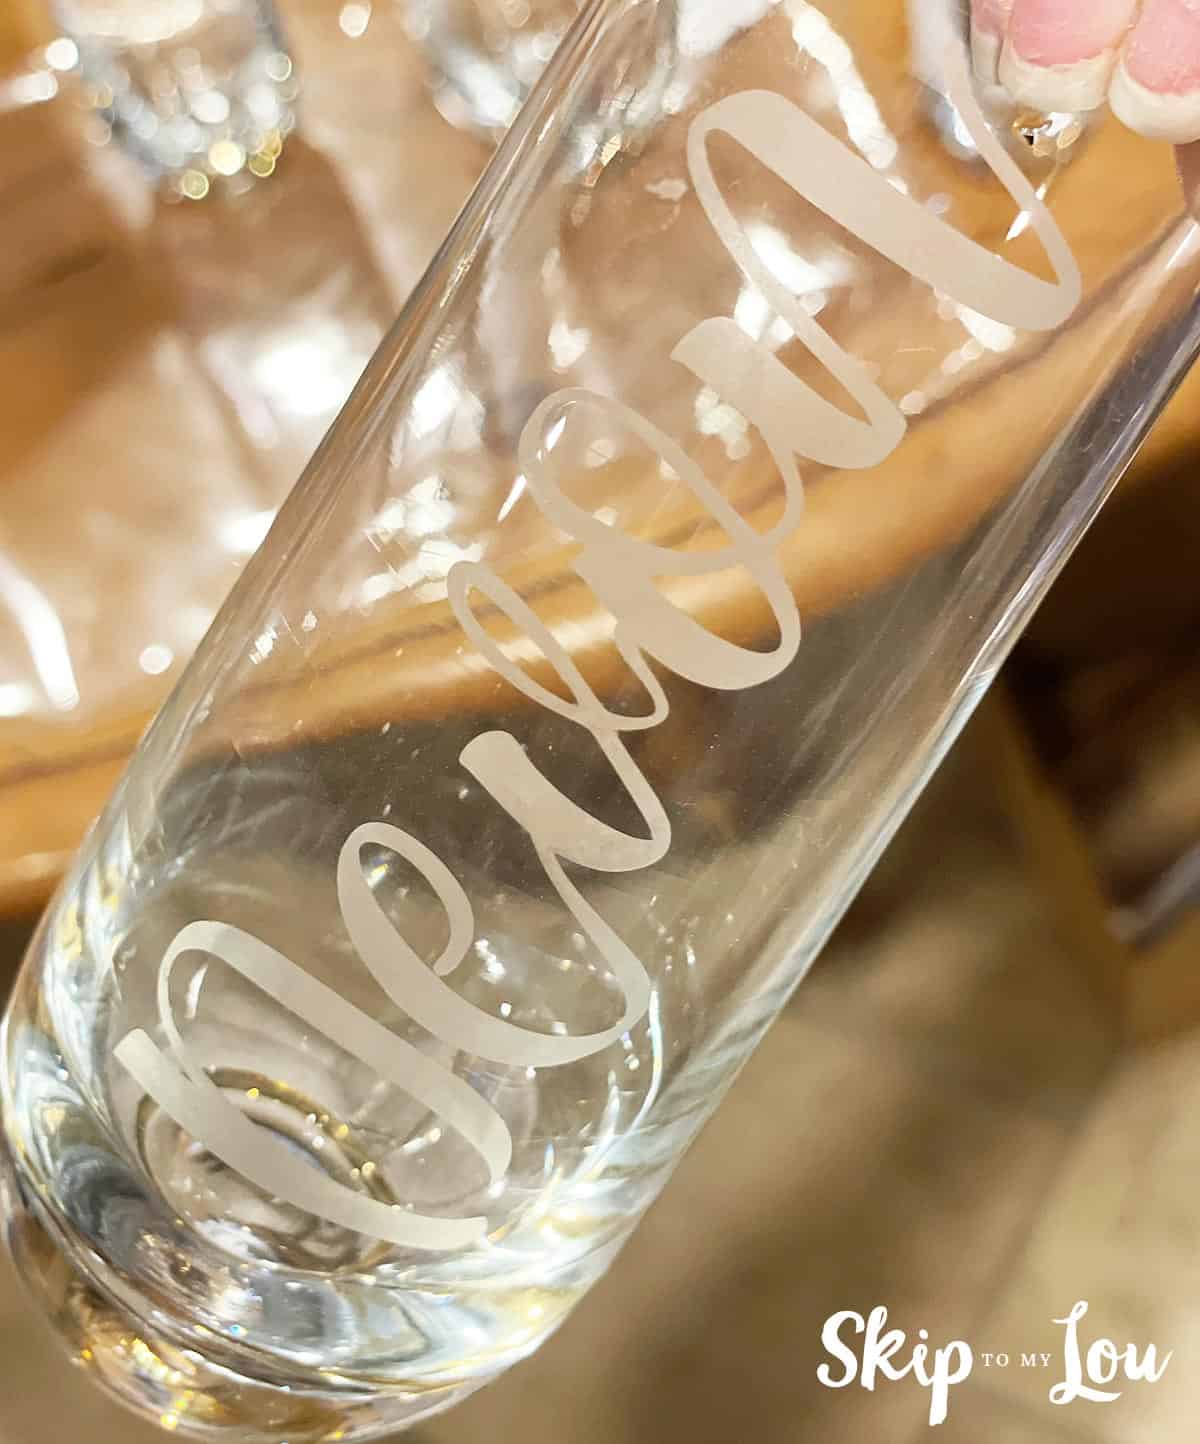 Final result - etched glass for a bridal gift.